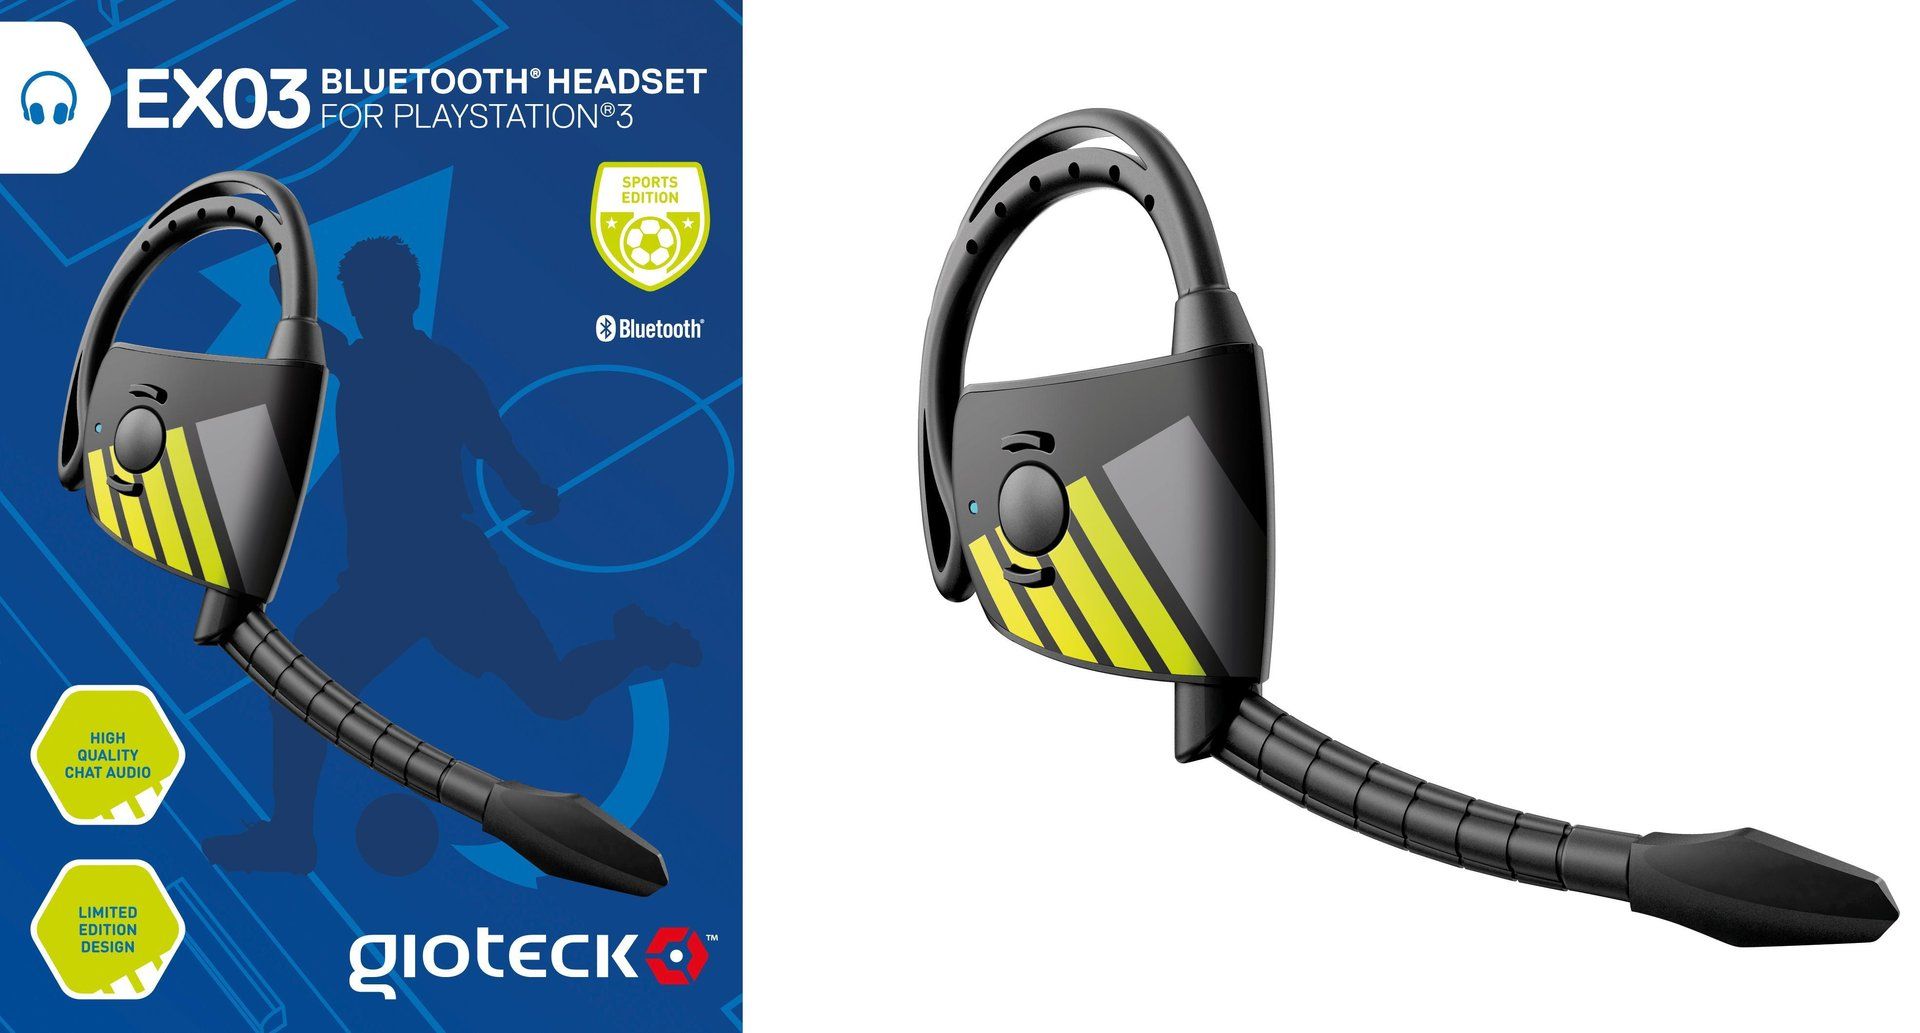 V *TRADE QTY* Brand New Gioteck EX03 Bluetooth Gaming Headset For Playsation 3 - Limited Edition